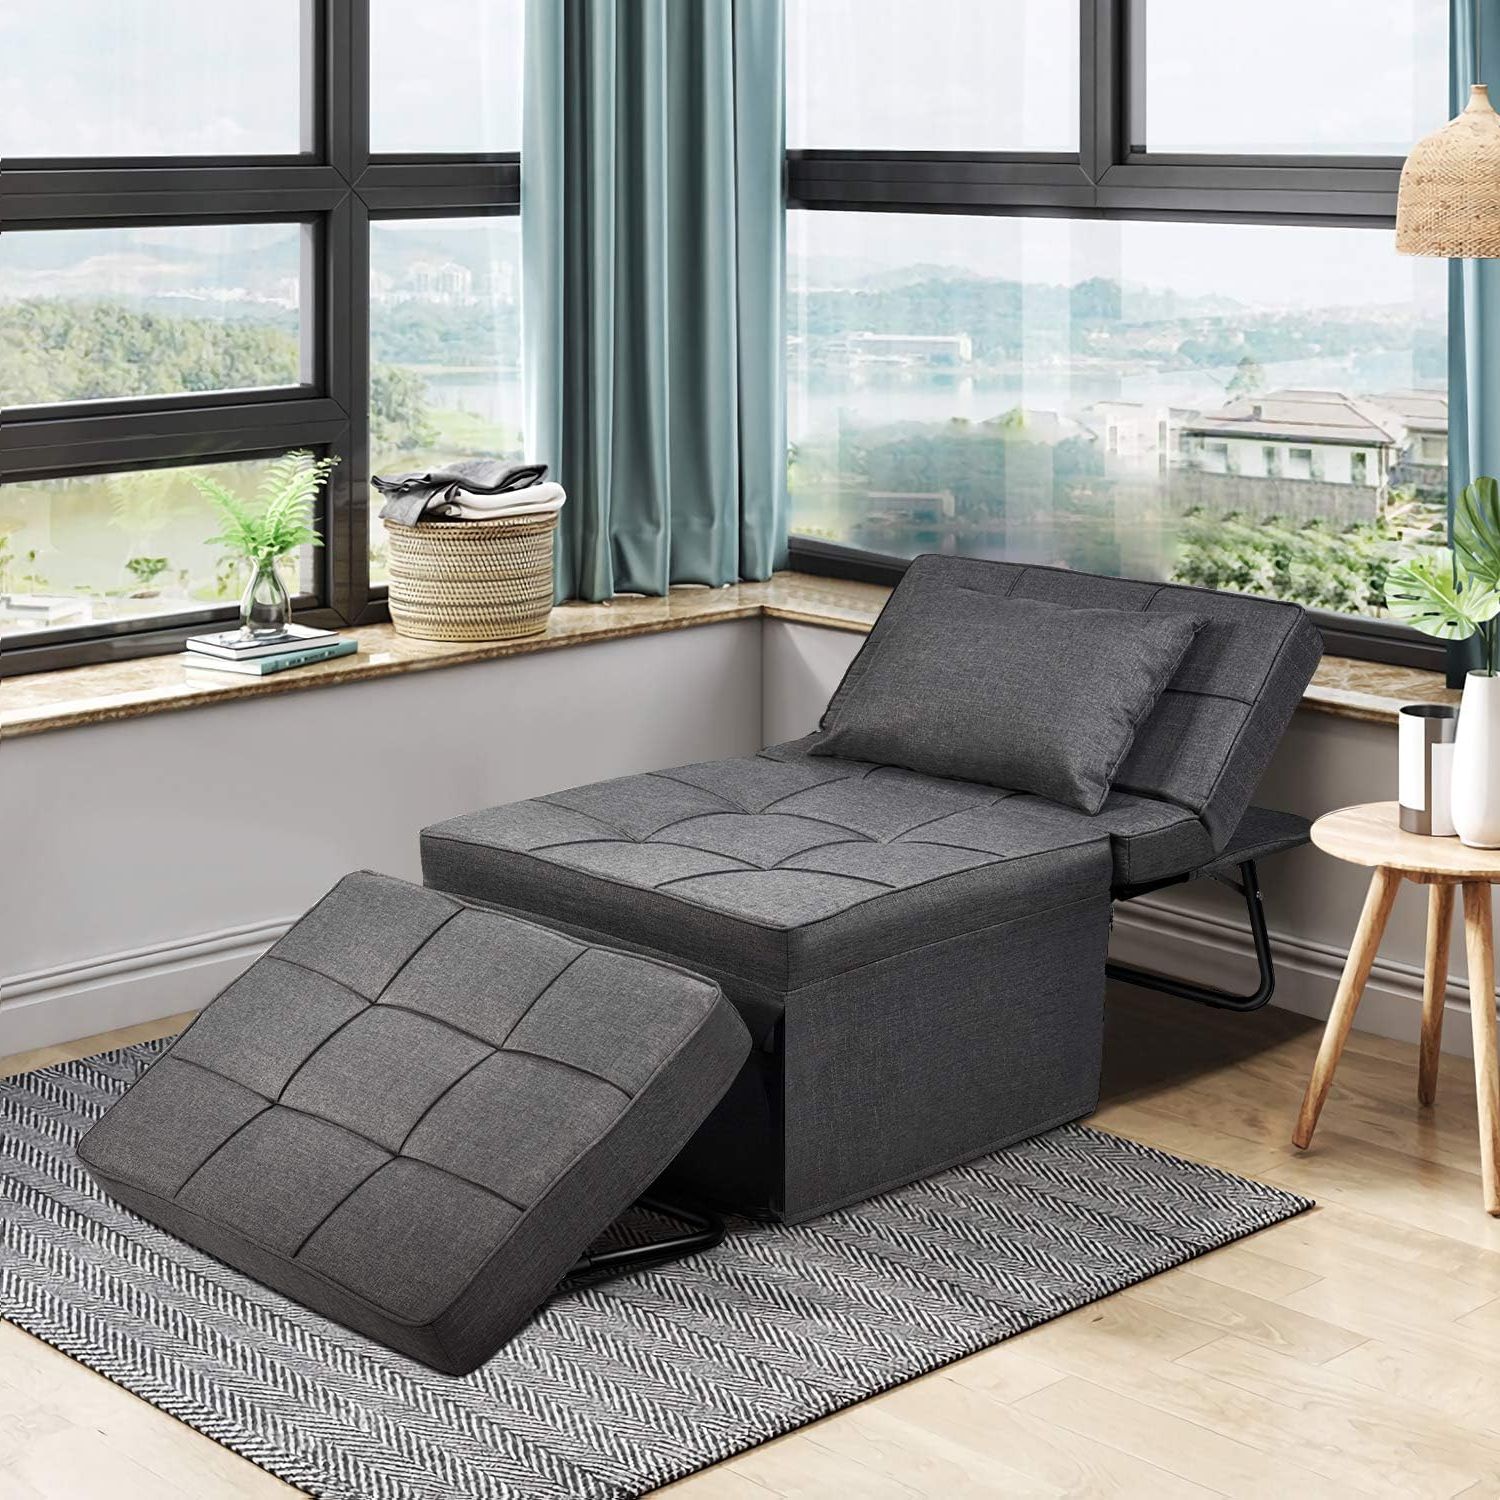 4 In 1 Convertible Sleeper Chair Beds Inside Current Amazon: Catrimown Sofa Bed, Convertible Chair 4 In 1 Multi Function (View 4 of 15)